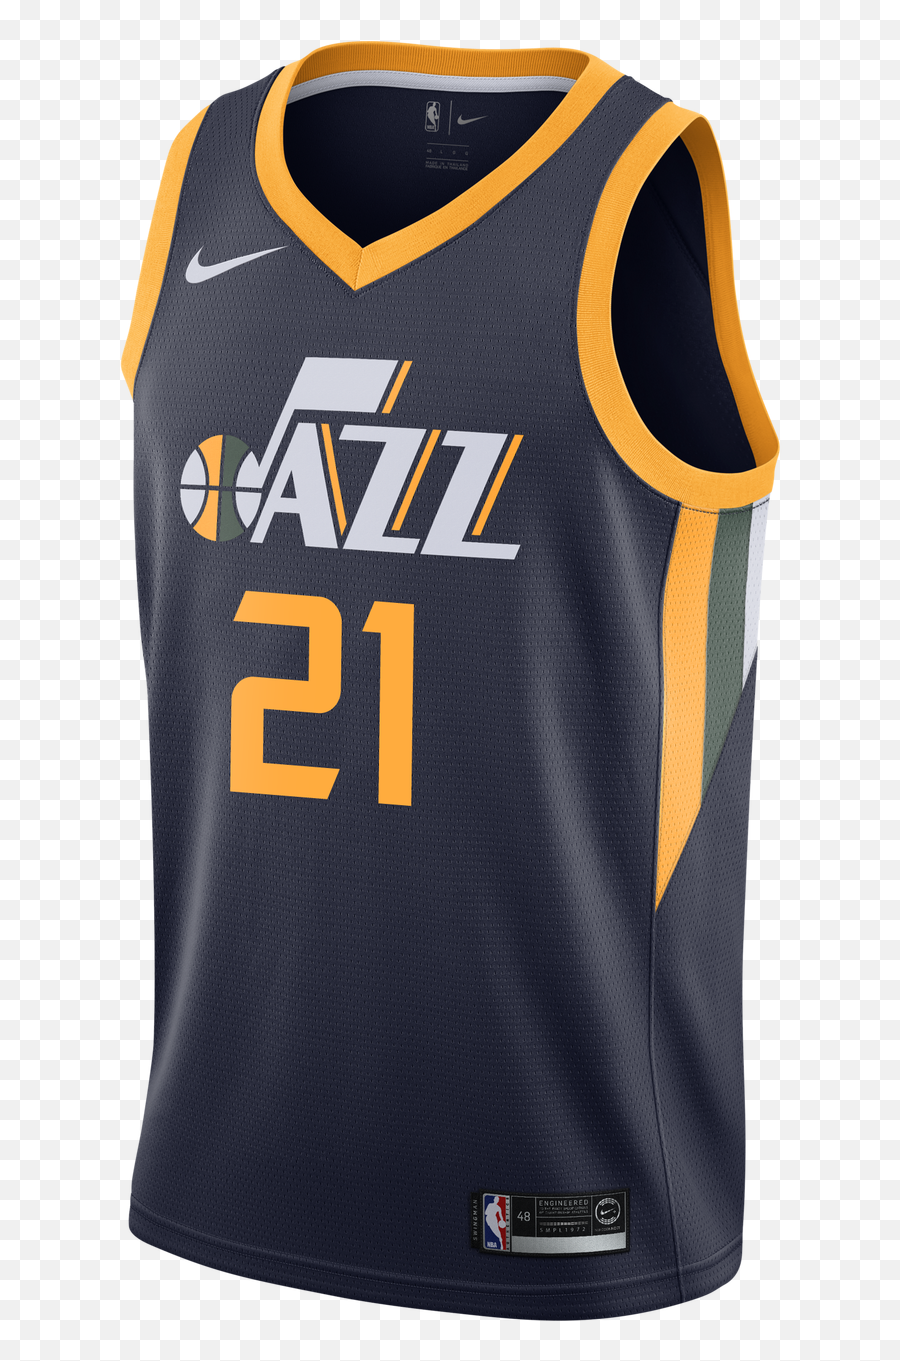 Icon Swingman Custom Jersey - Navy Primary Nike Rudy Gobert Jersey Png,Icon Golf Cart Review